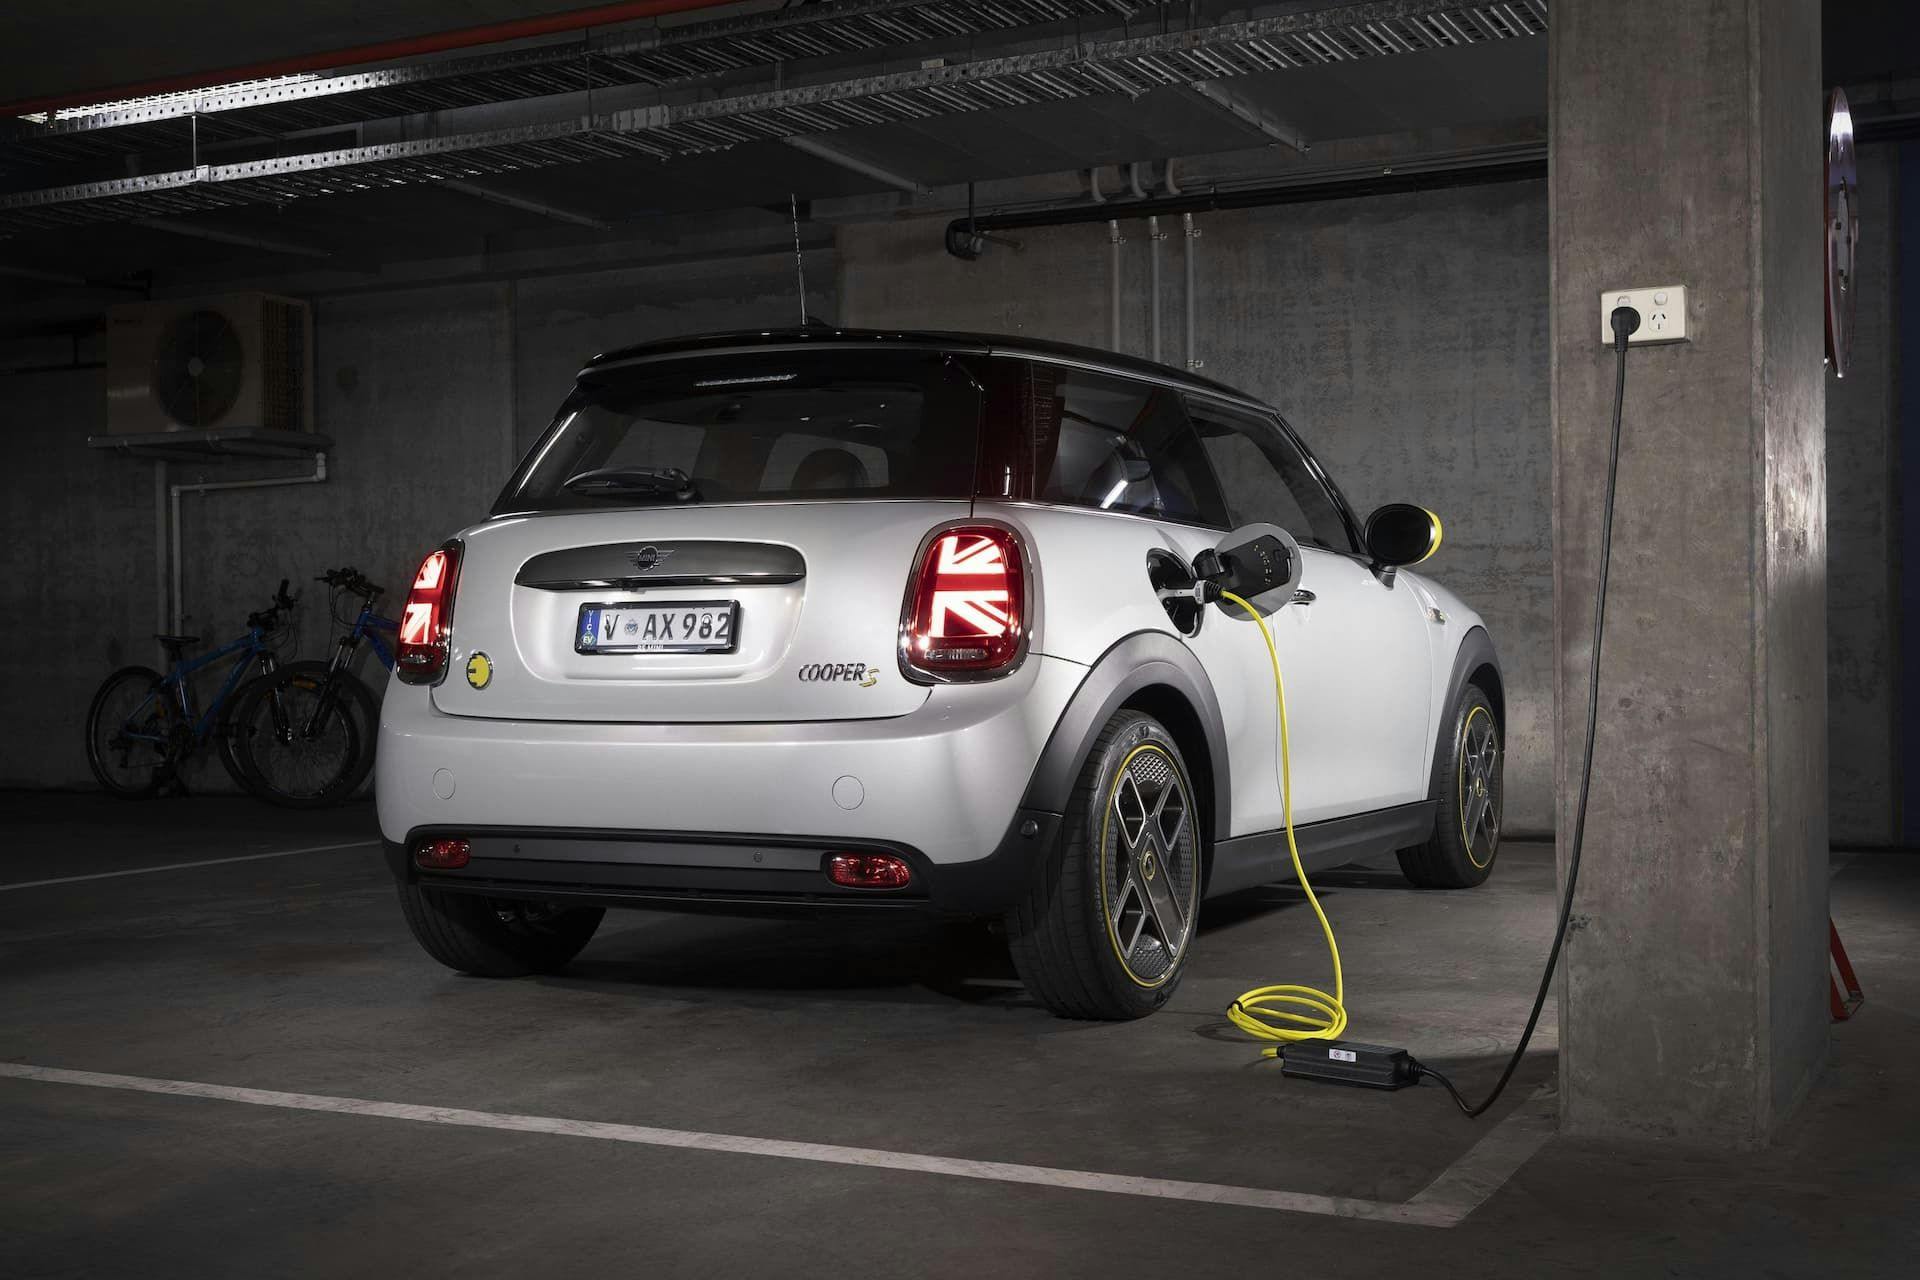 Mini EV charging from home plug in apartment